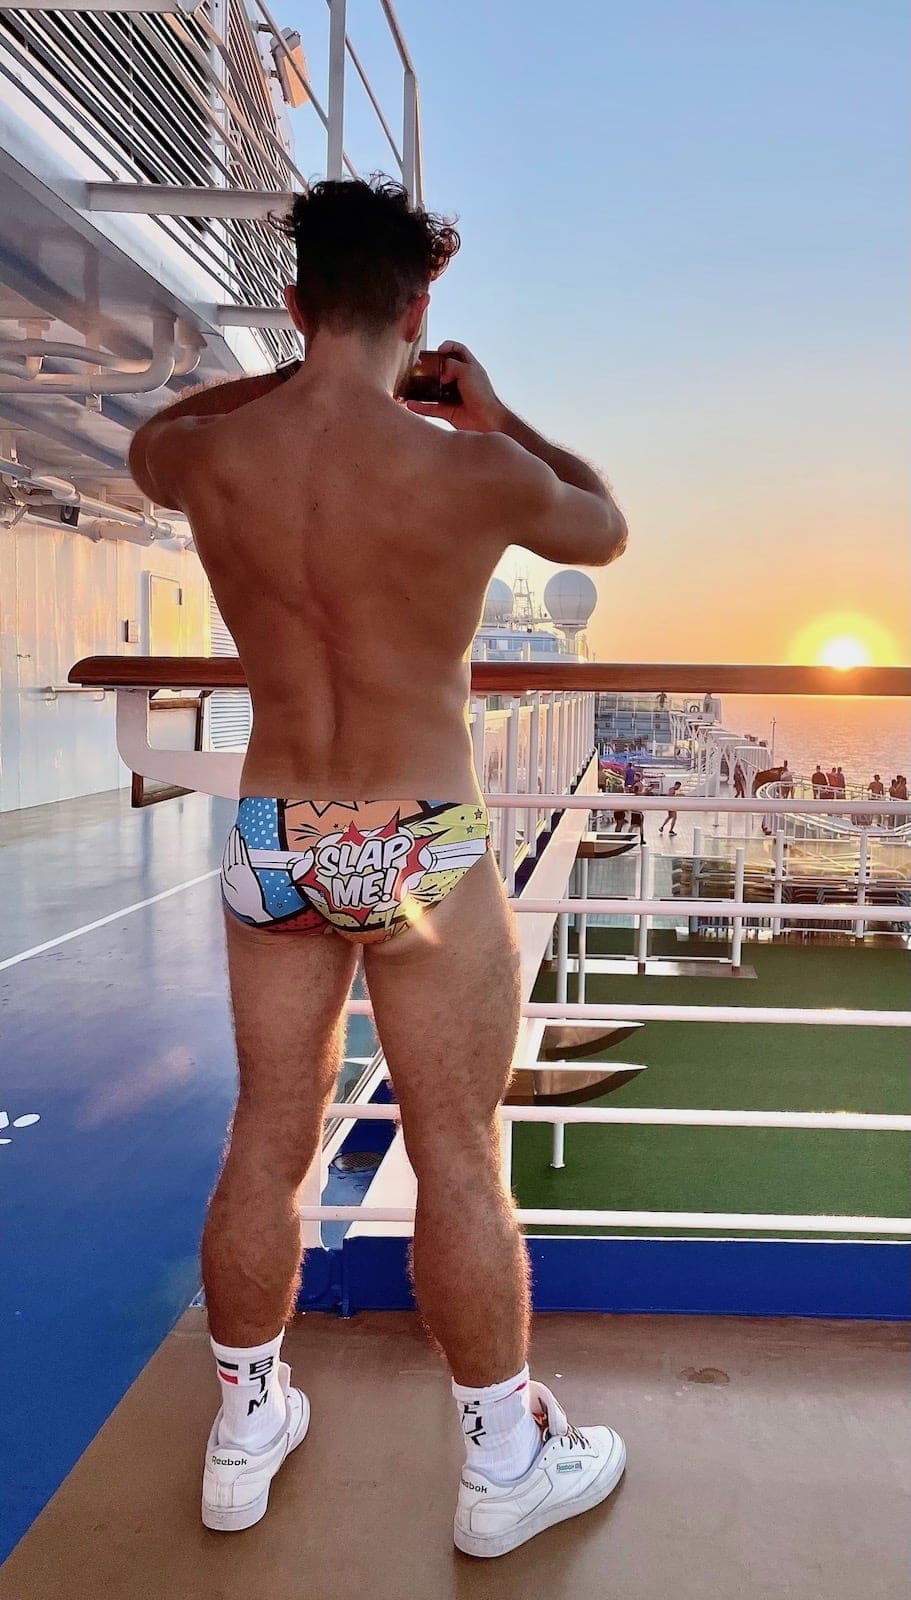 Stefan wearing Addicted SLAP ME Speedos on a cruise.